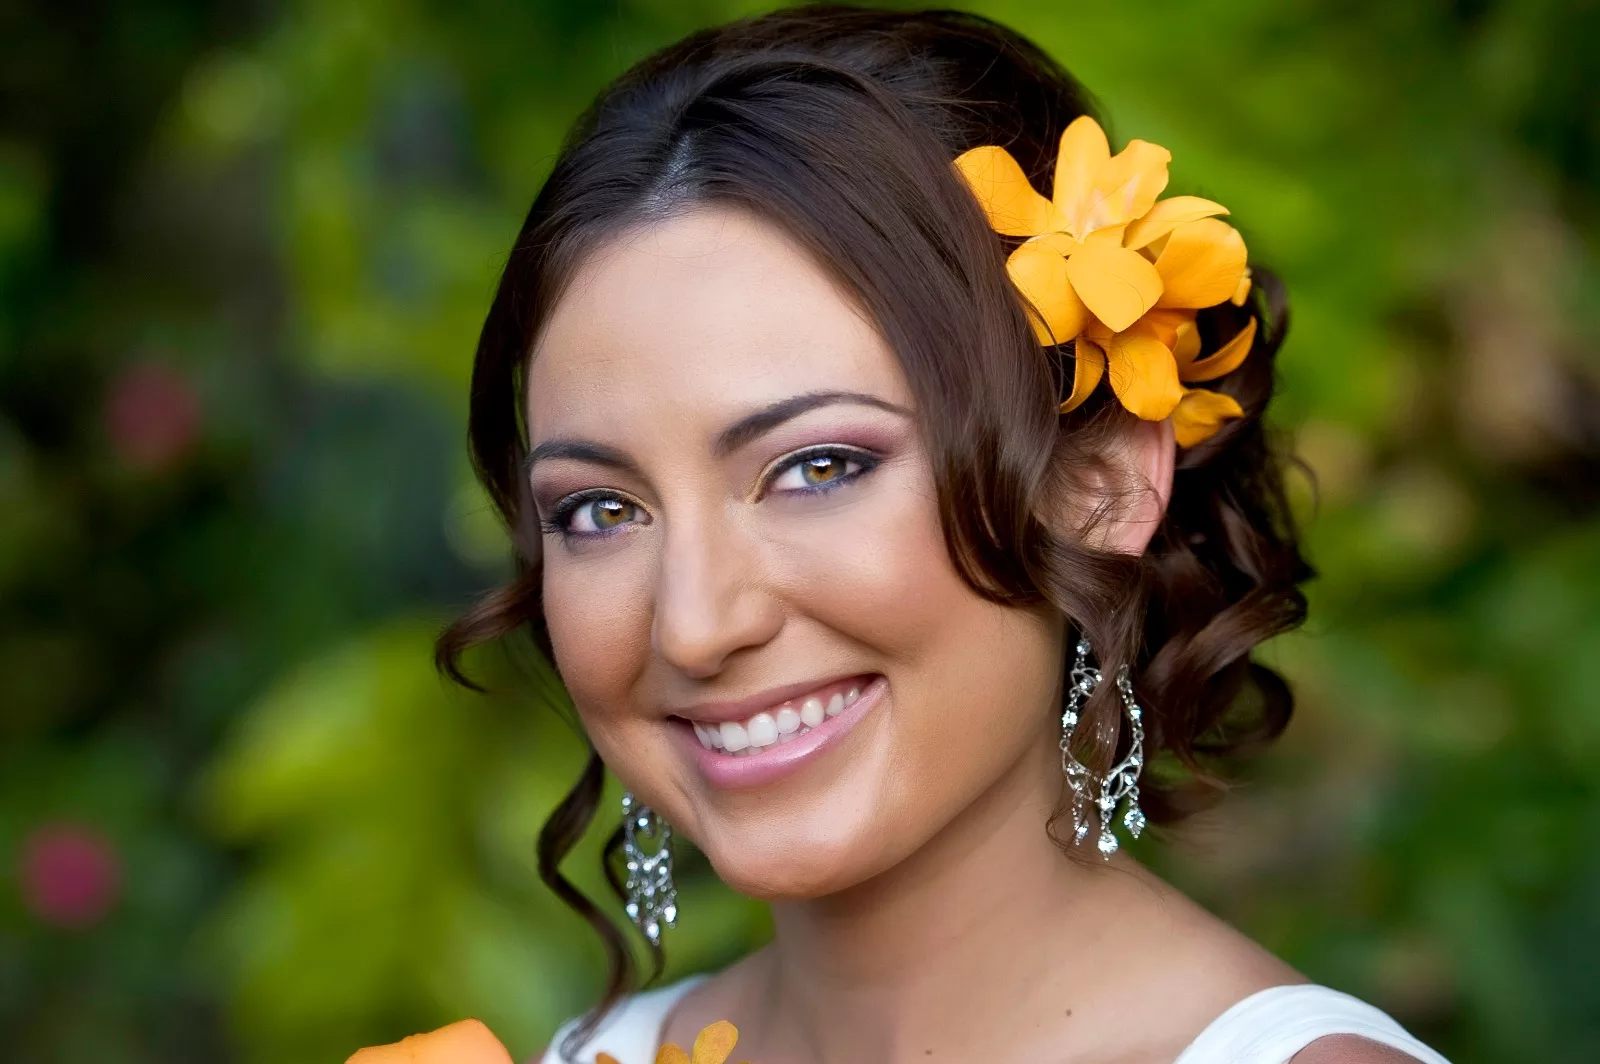 an image of a woman smiling with a flower on her head taken by koolina photographer